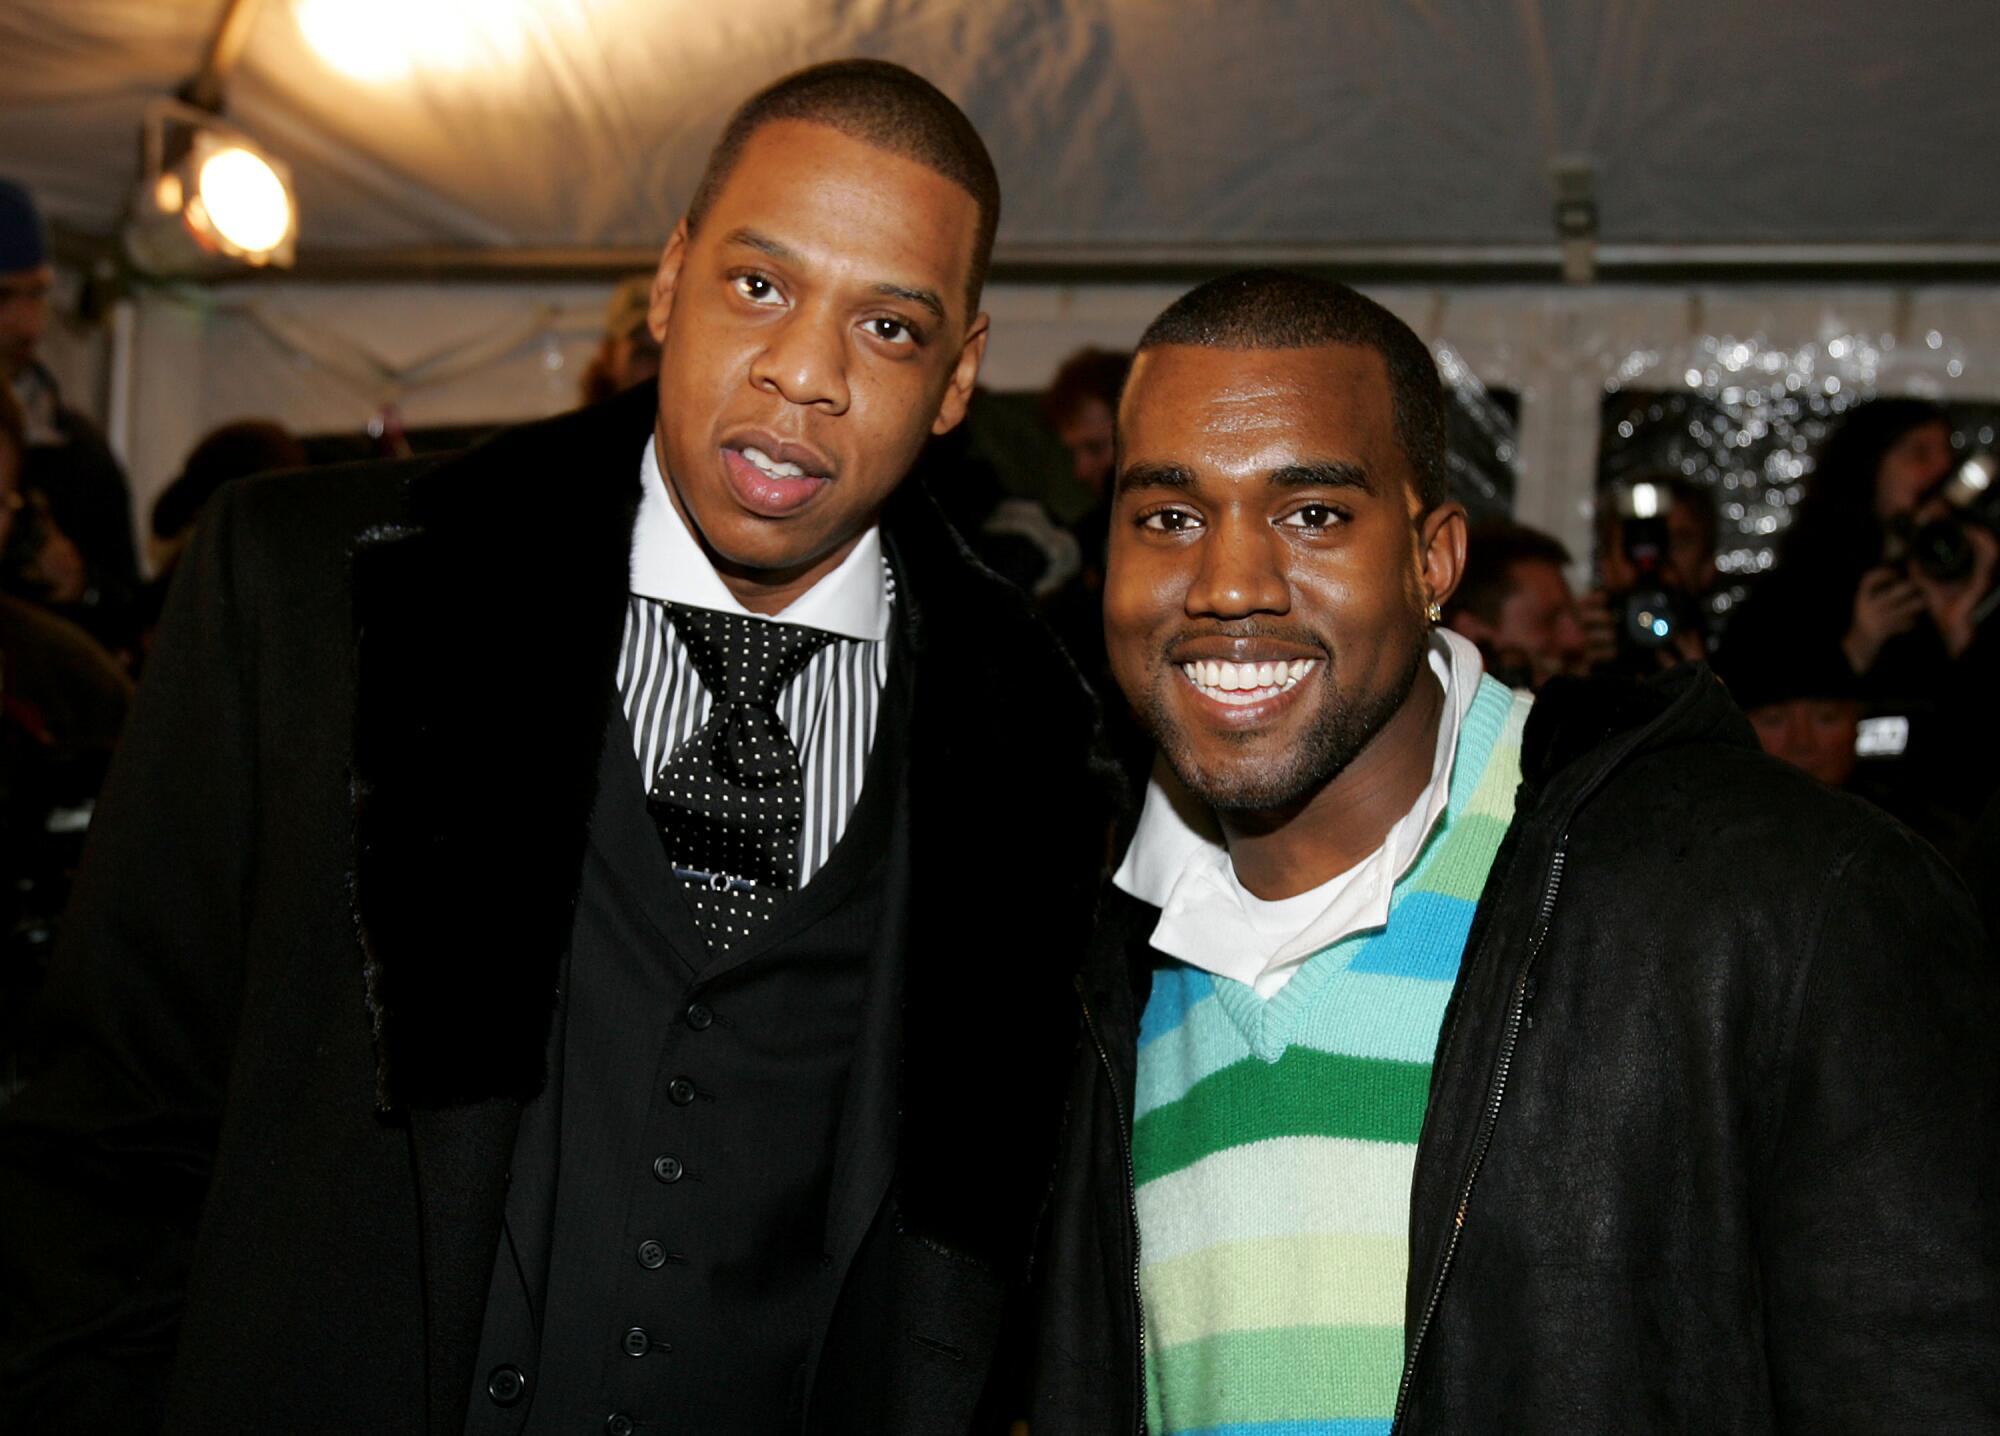 Two rap stars stand side by side for a photo.